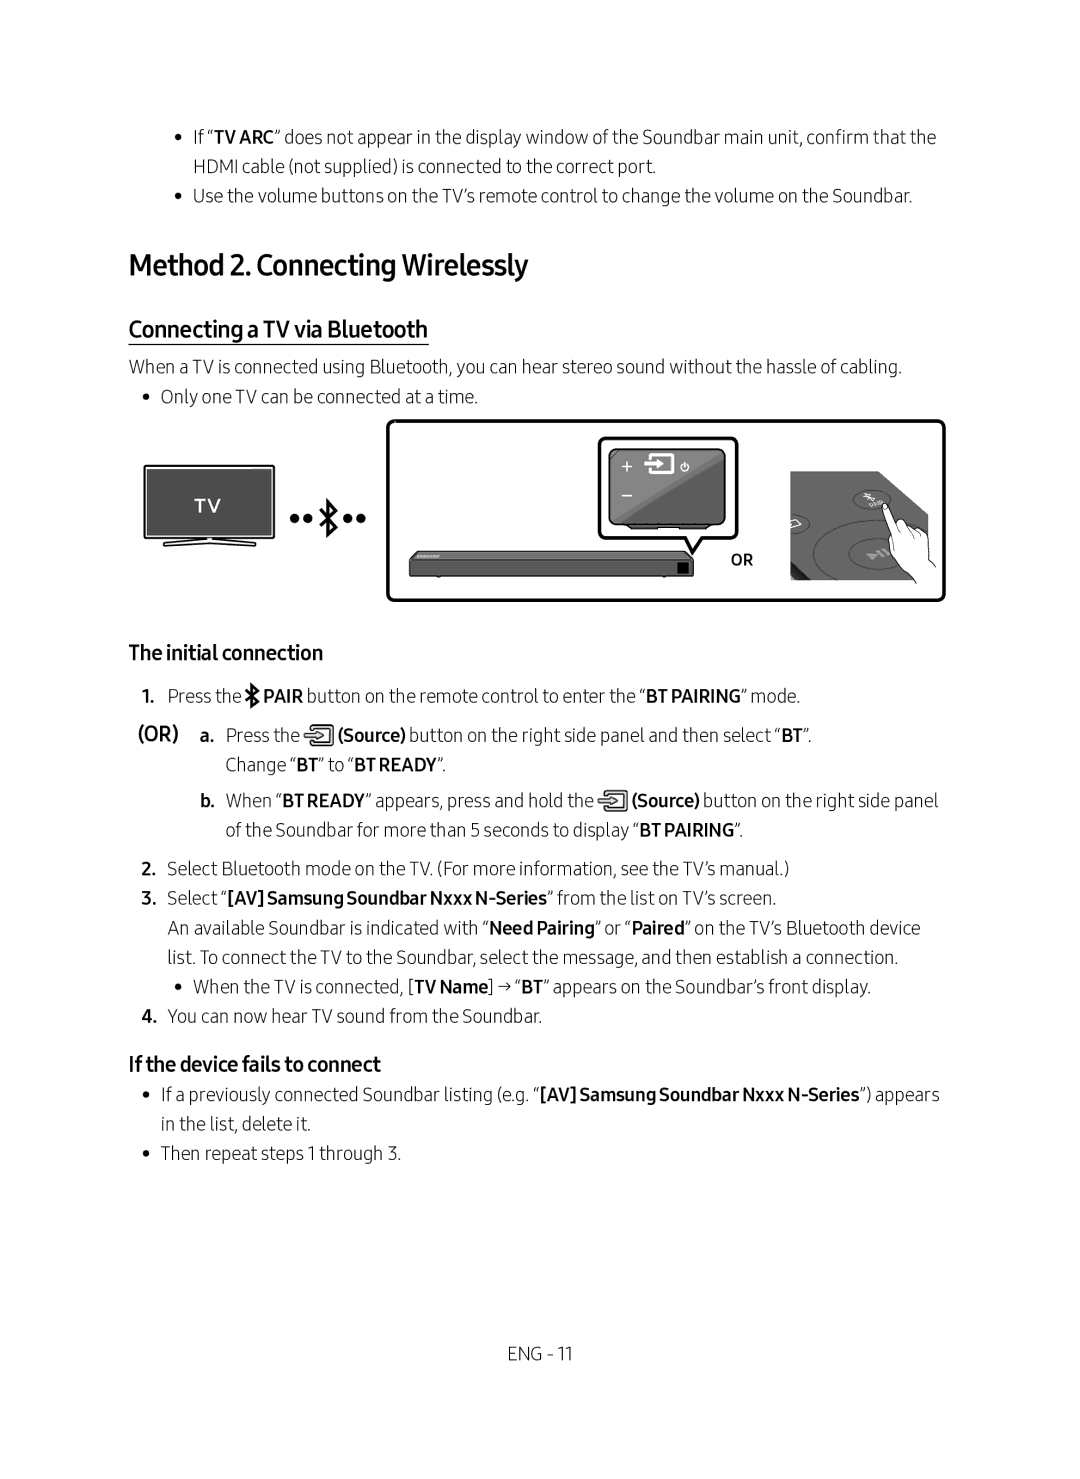 Samsung HW-N450/ZF manual Method 2. Connecting Wirelessly, Connecting a TV via Bluetooth, Initial connection 